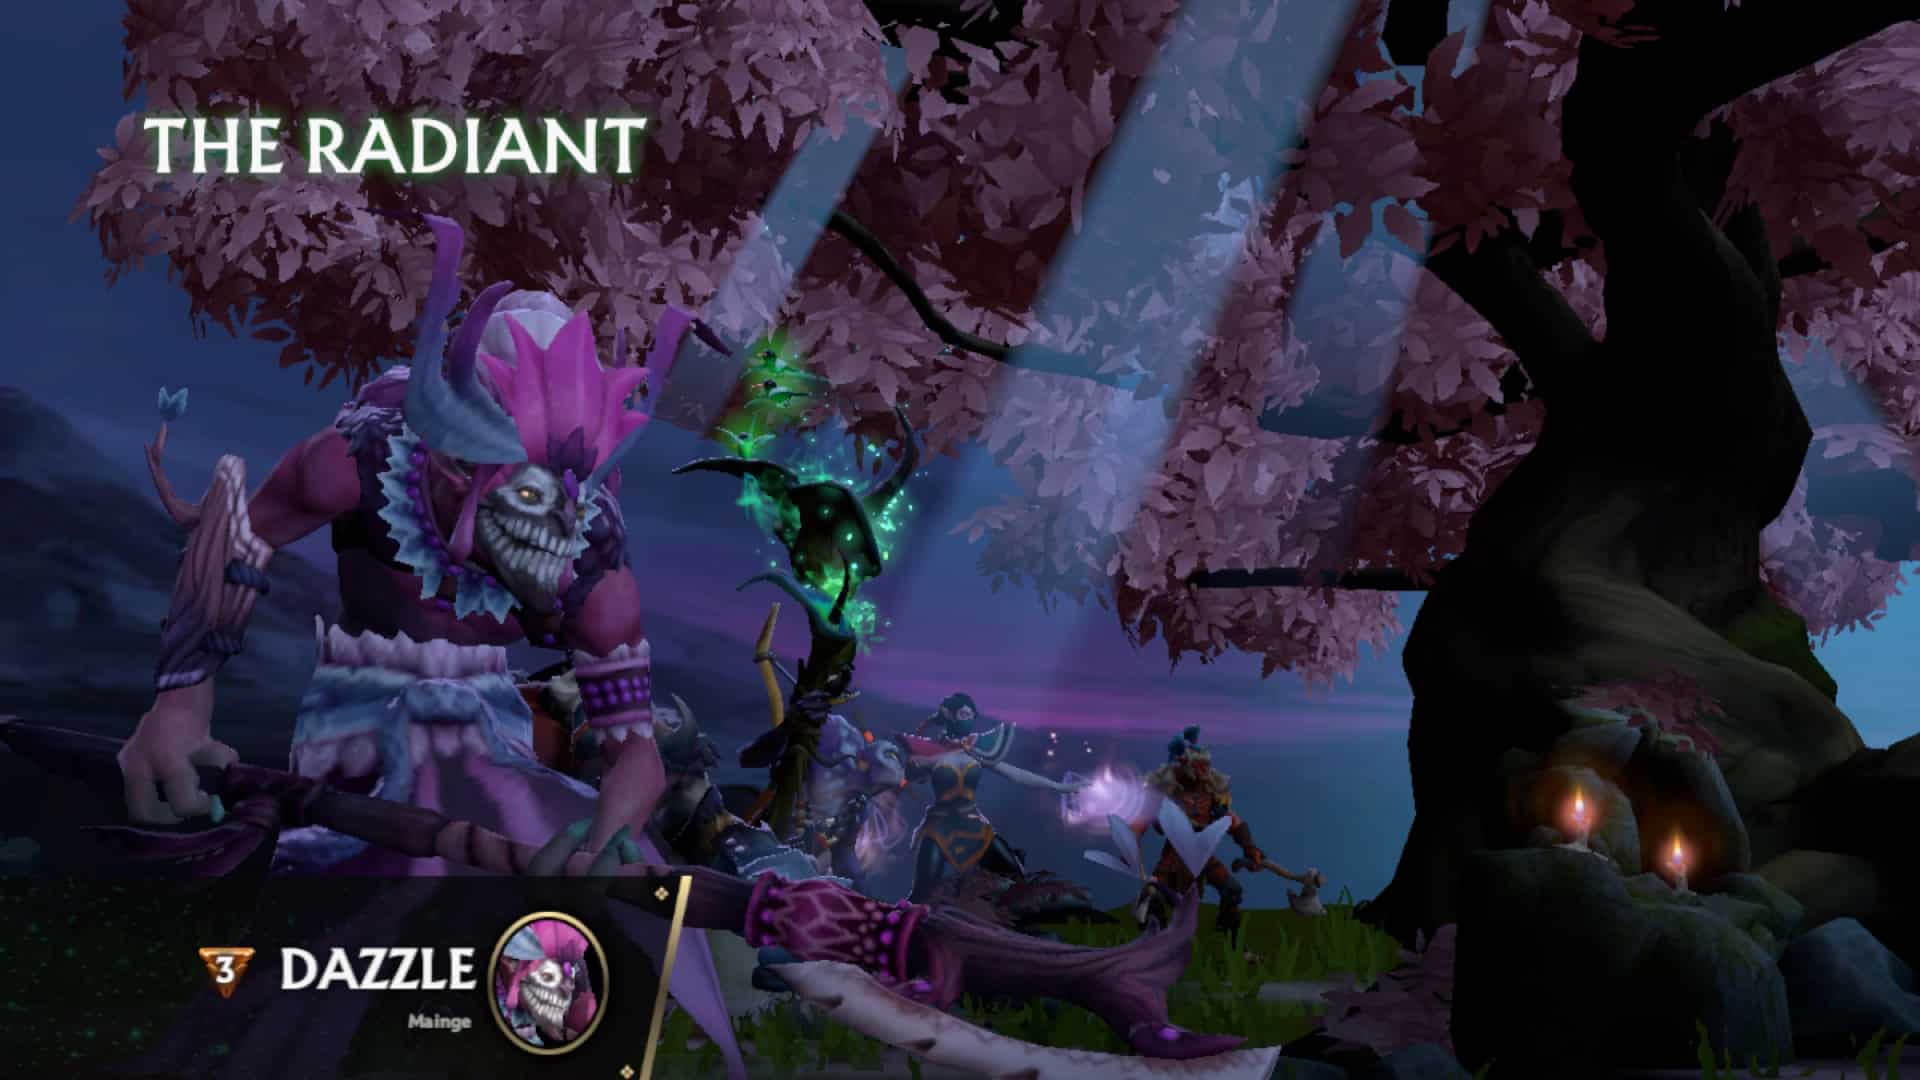 Dota 2 Dazzle Guide – A Splendid Support Hero to Heal Allies